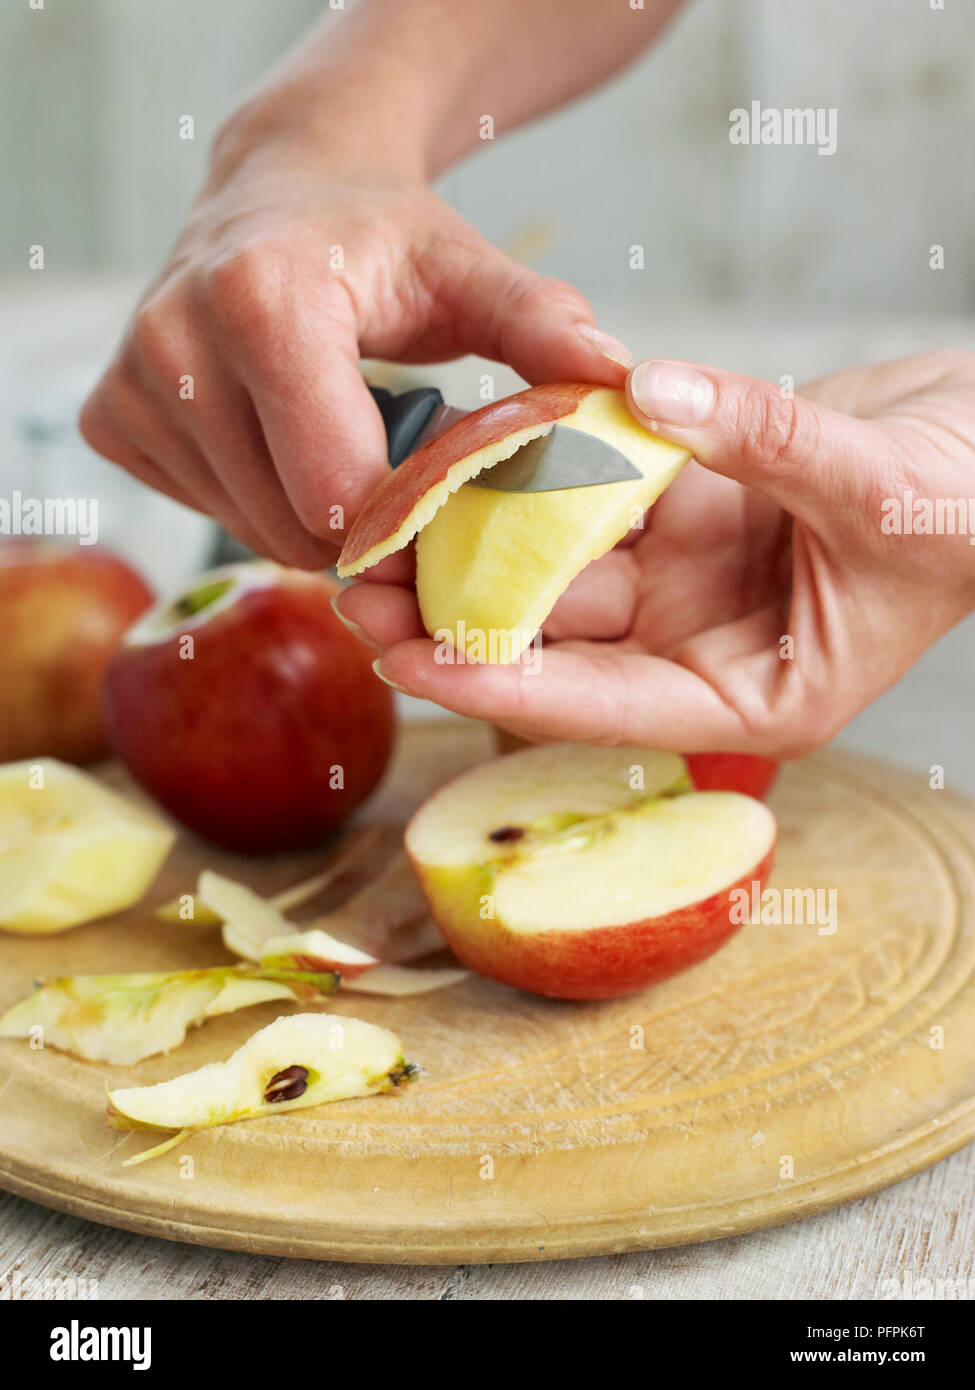 Peeling apples with knife Stock Photo